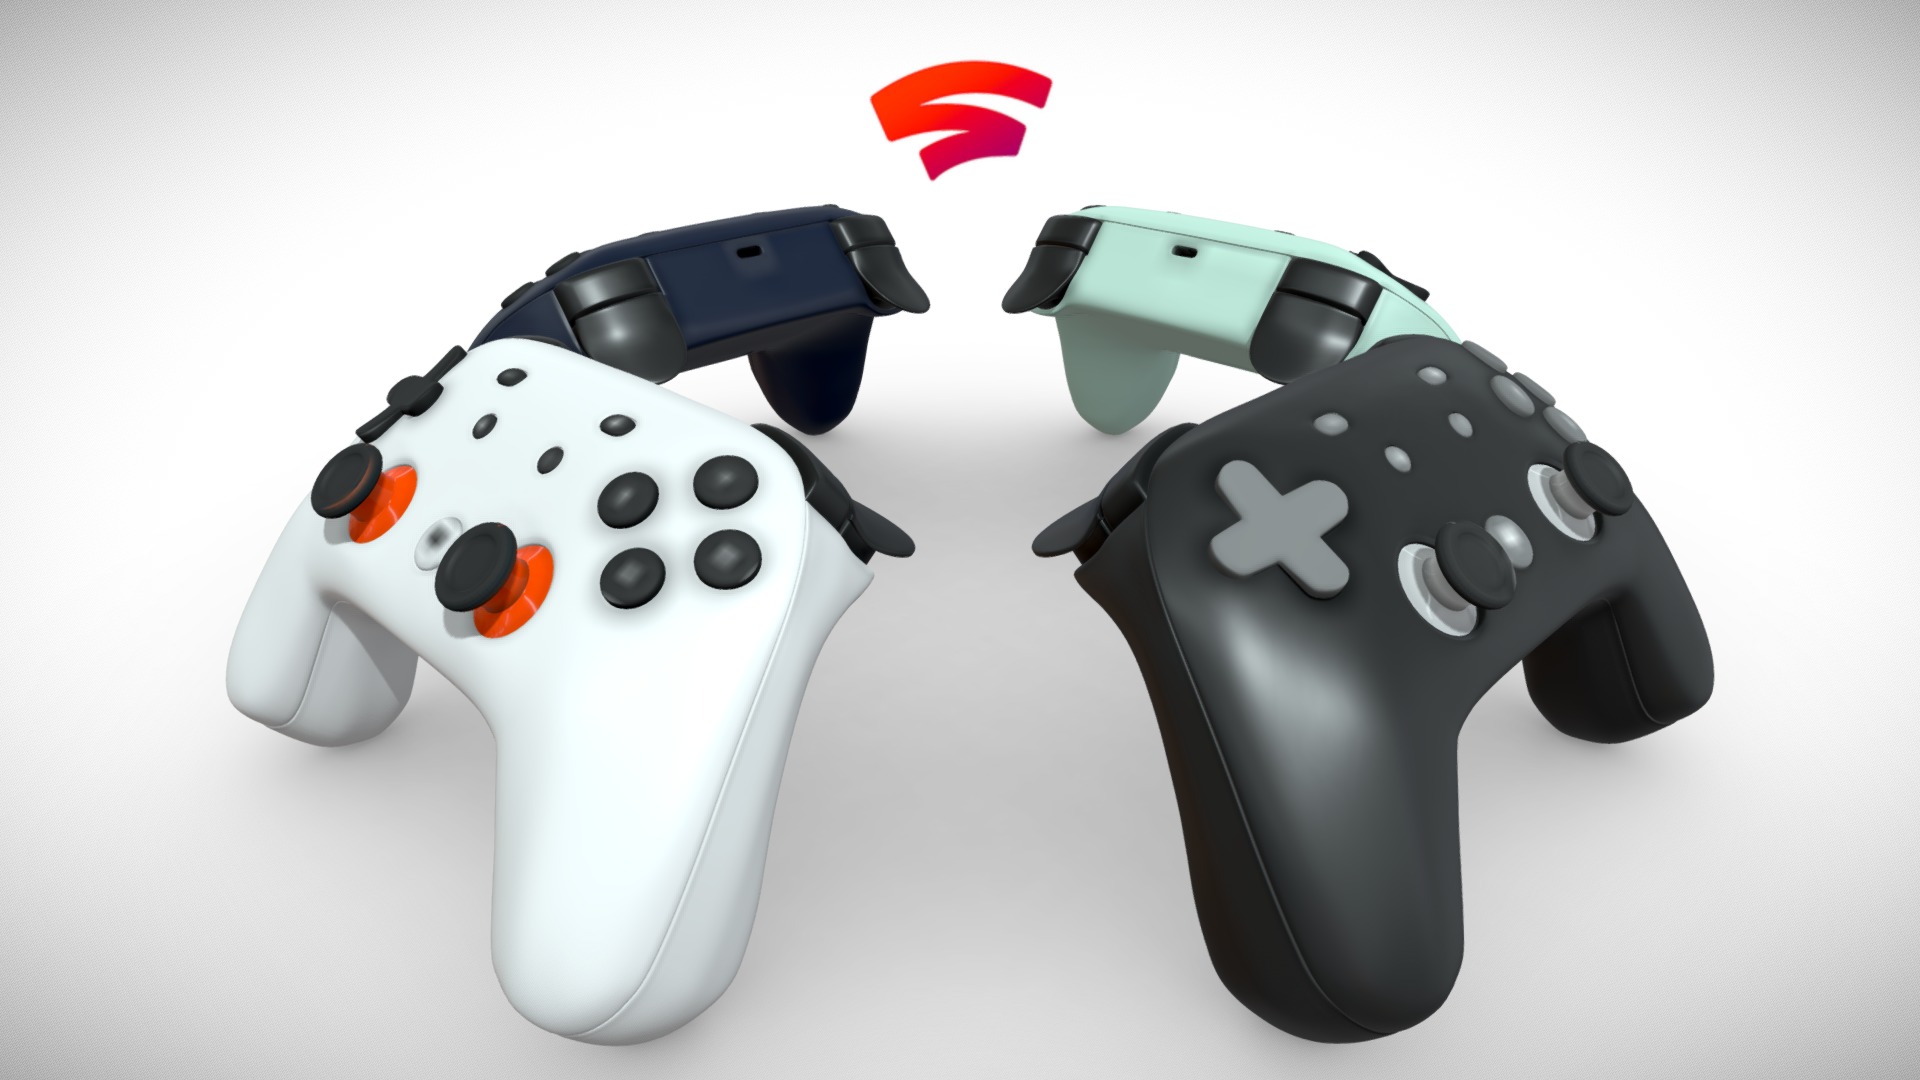 3D model Google Stadia Controllers – 4 Pack - This is a 3D model of the Google Stadia Controllers - 4 Pack. The 3D model is about a pair of black and white game controllers.